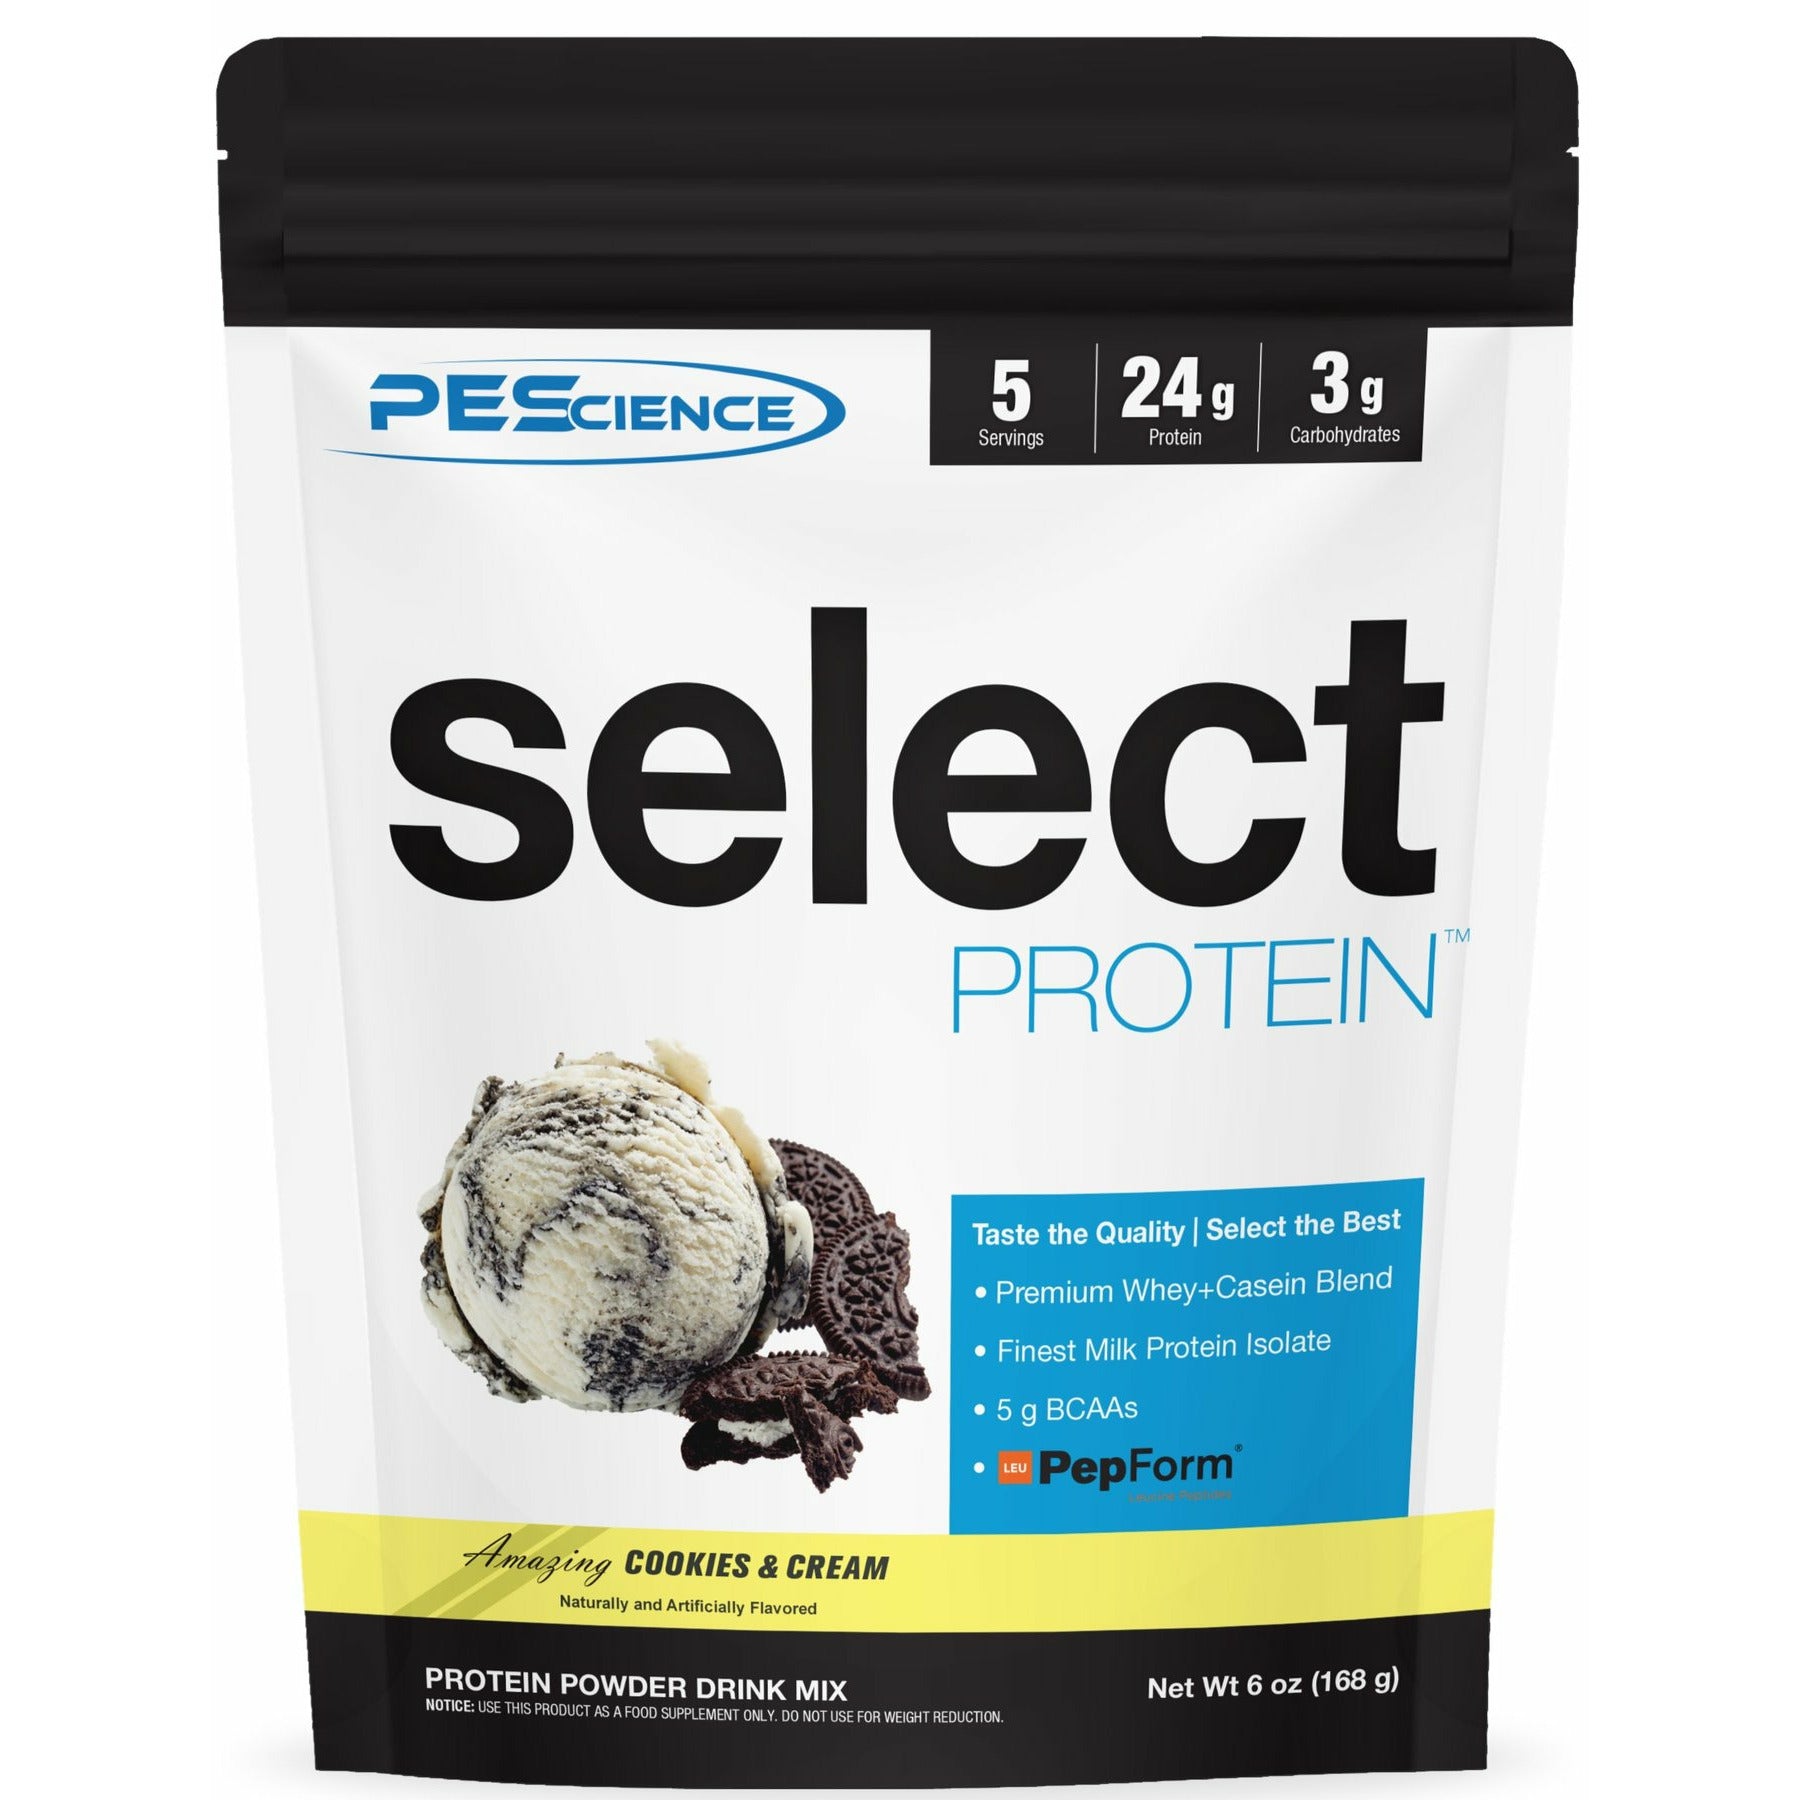 PEScience Select Protein TRIAL SIZE (5 servings) Whey Protein Cookies & Cream PEScience